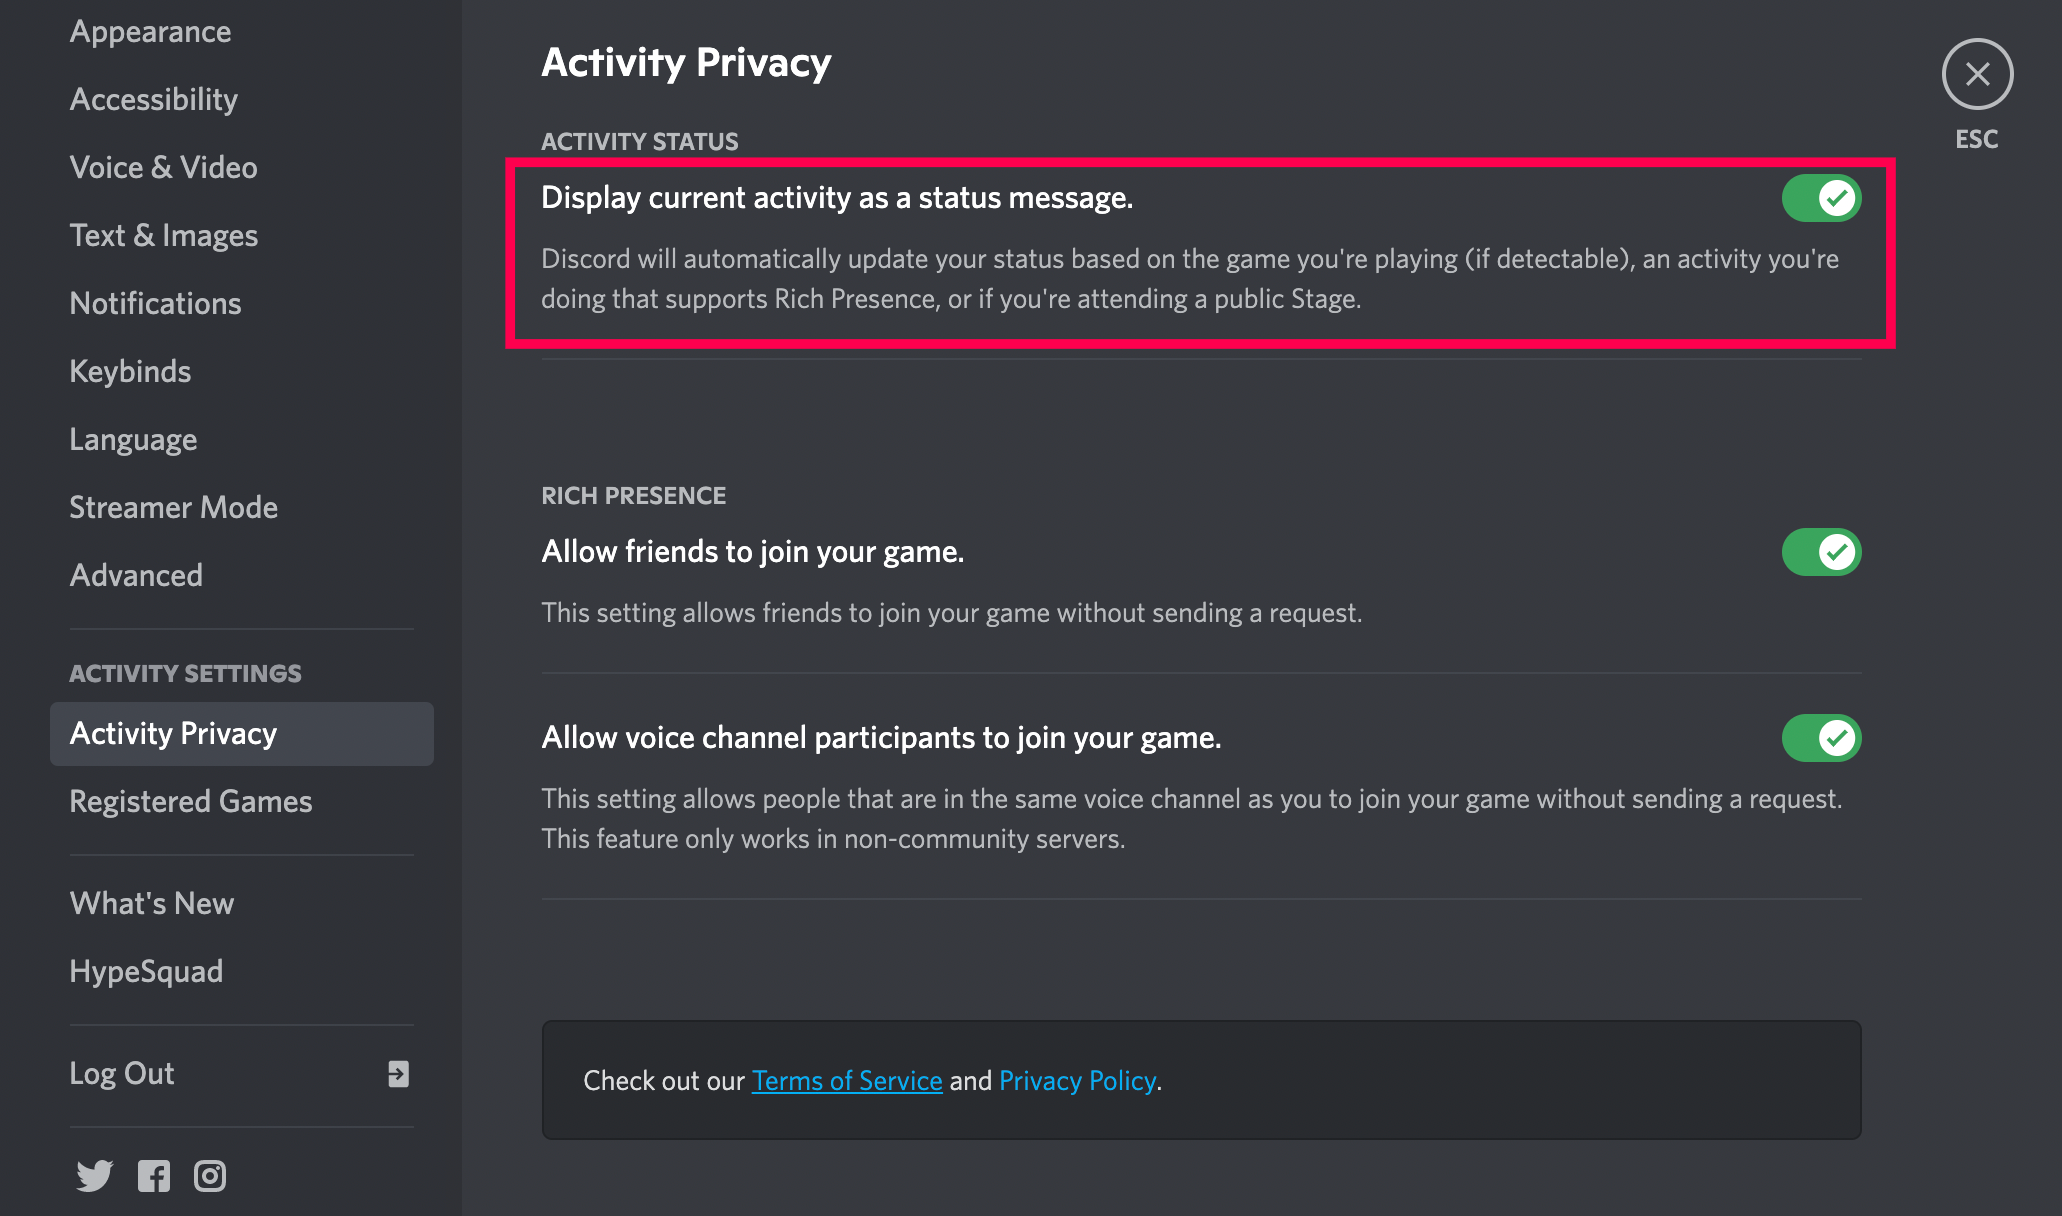 Even if a friend's game details or entire profile are set to